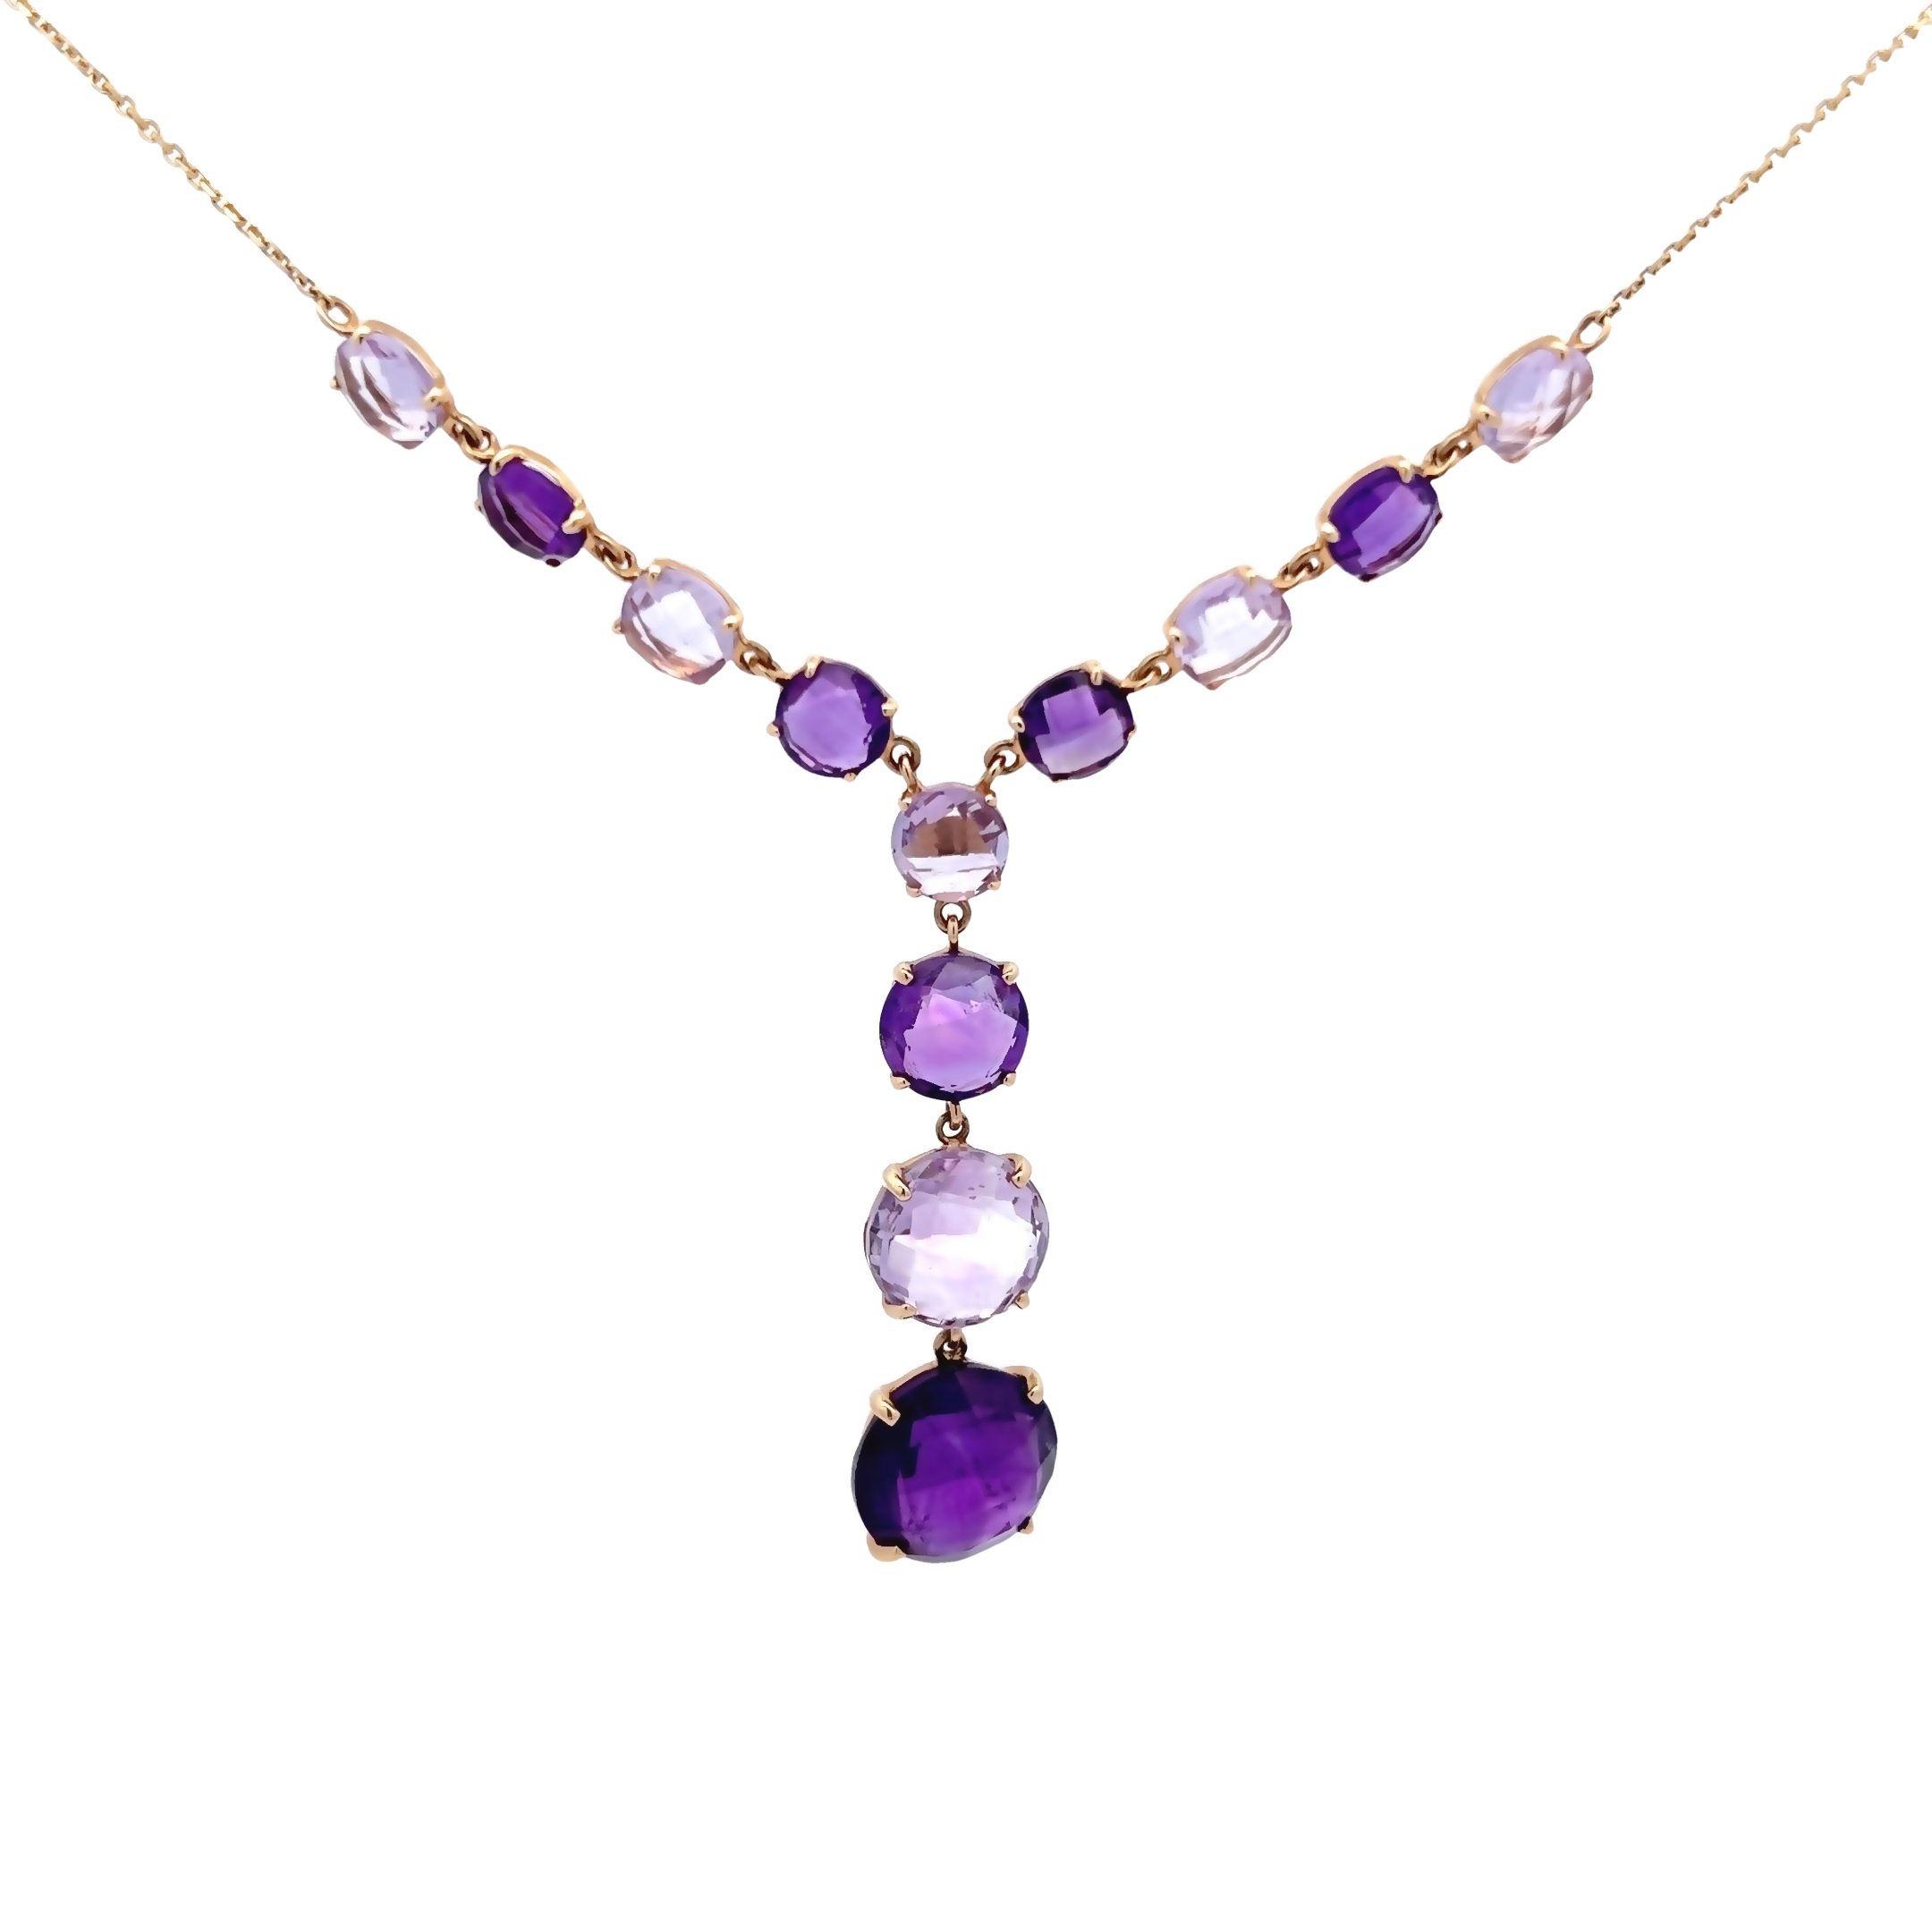 14 Karat Yellow Gold Y Drop Necklace With 12=19.50 Total Weight Rose Cut Amethysts.